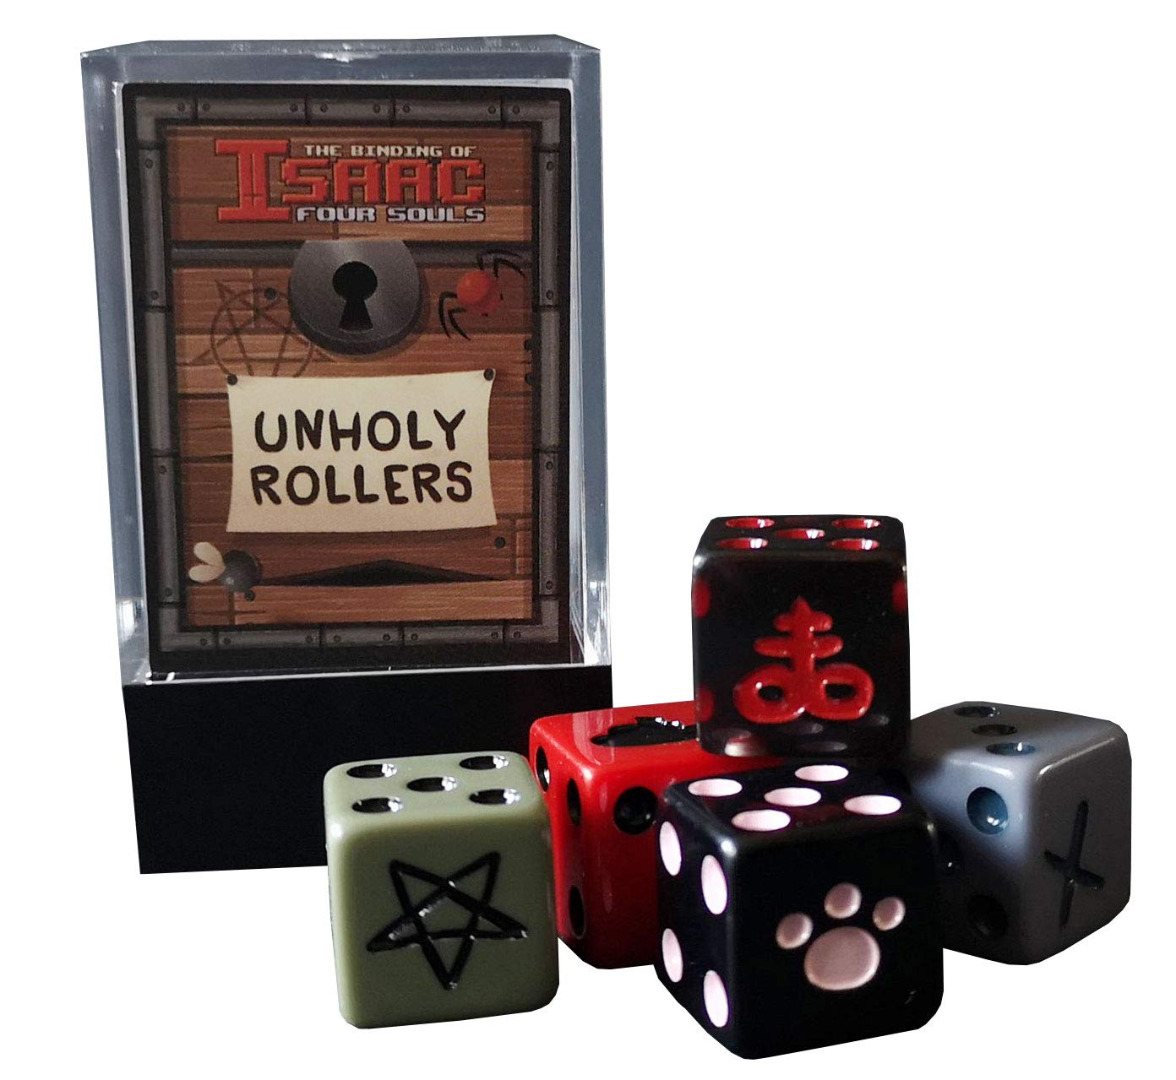 The Binding of Isaac: Unholy rollers